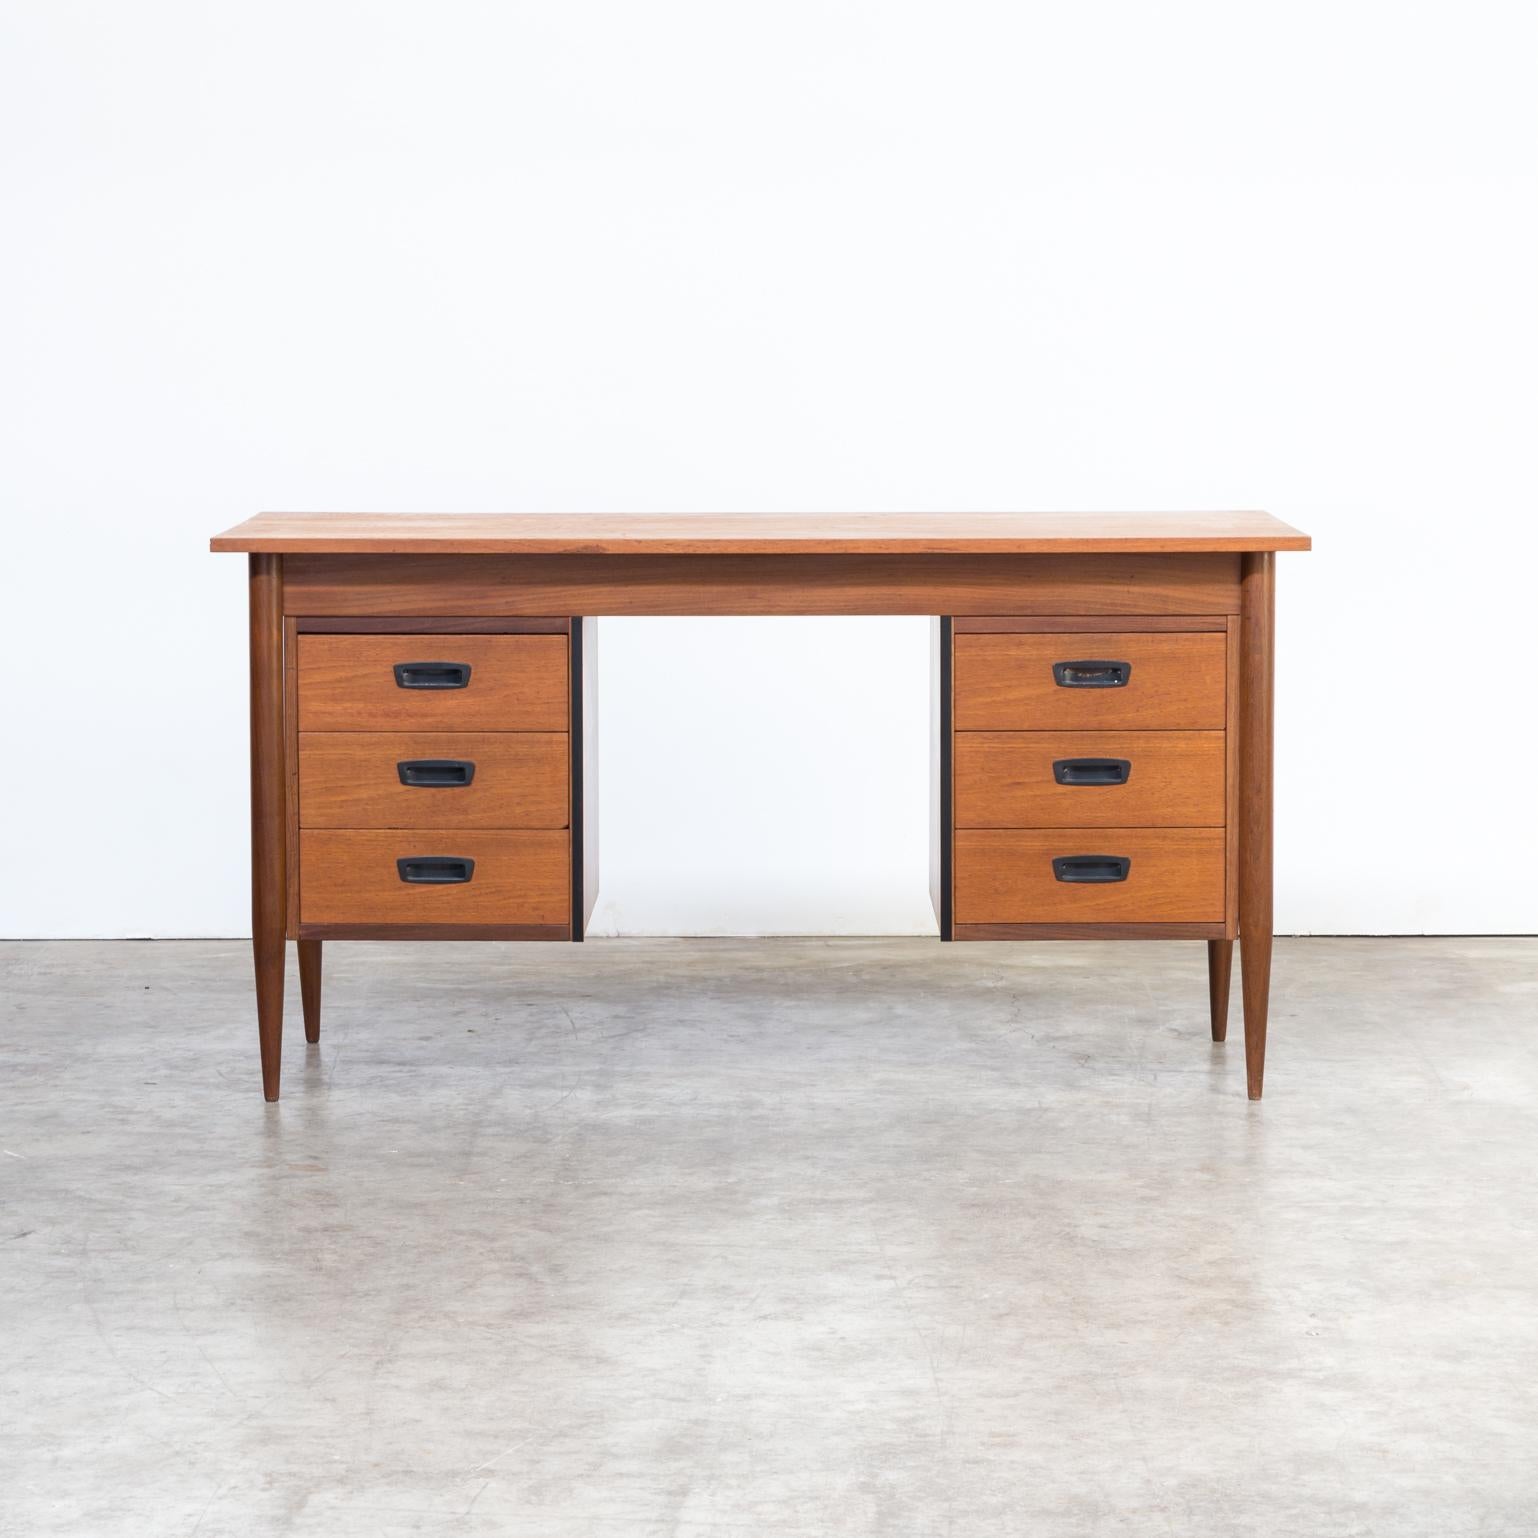 1960s Teak writing desk. Good condition, consistent with age and use.